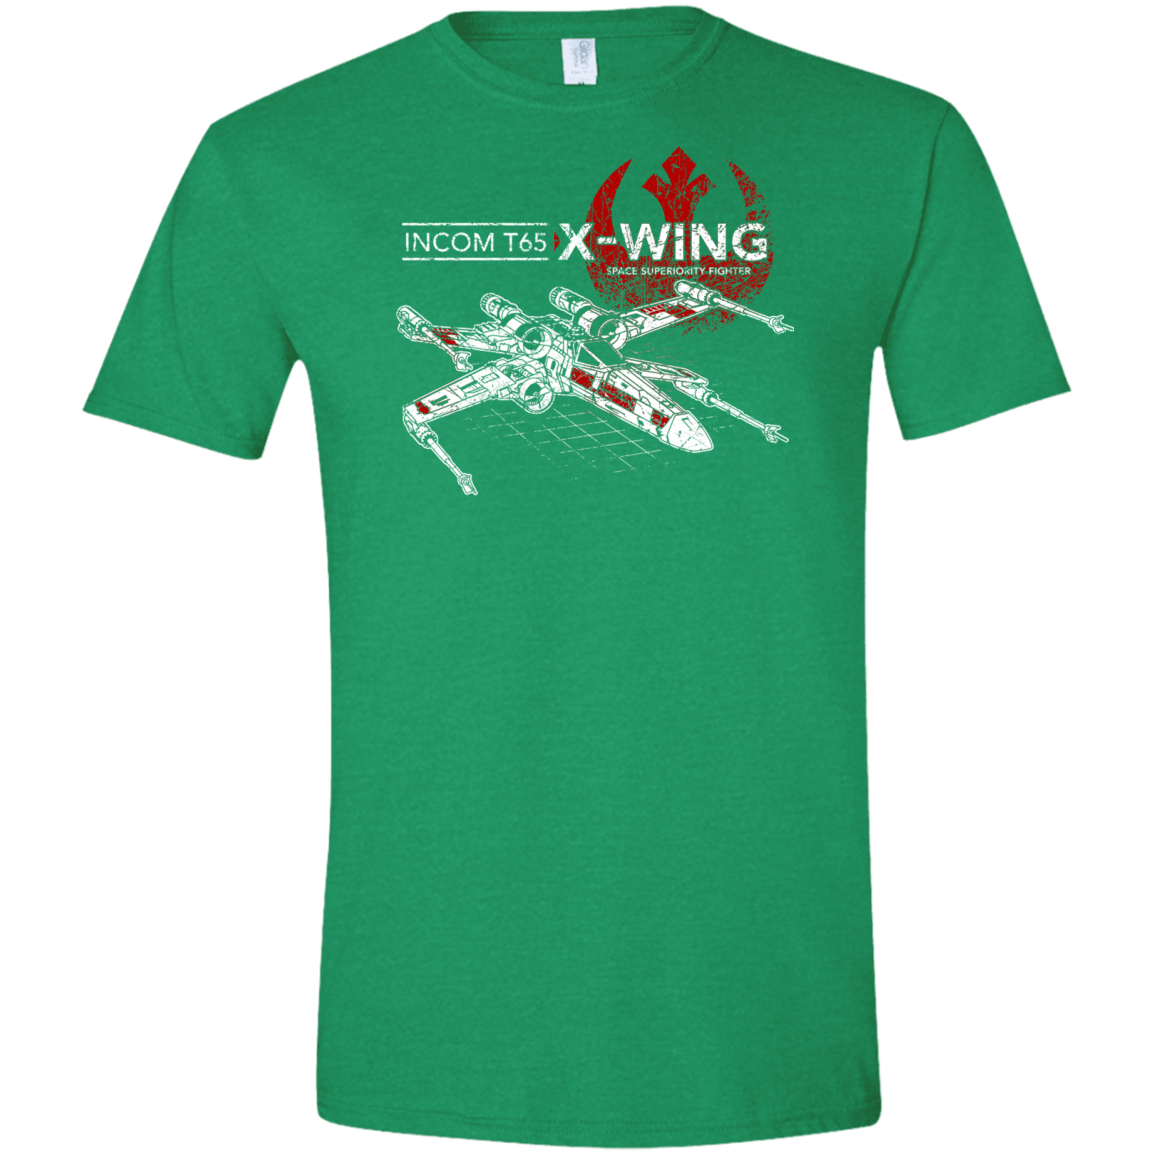 T-Shirts Heather Irish Green / S T-65 X-Wing Men's Semi-Fitted Softstyle